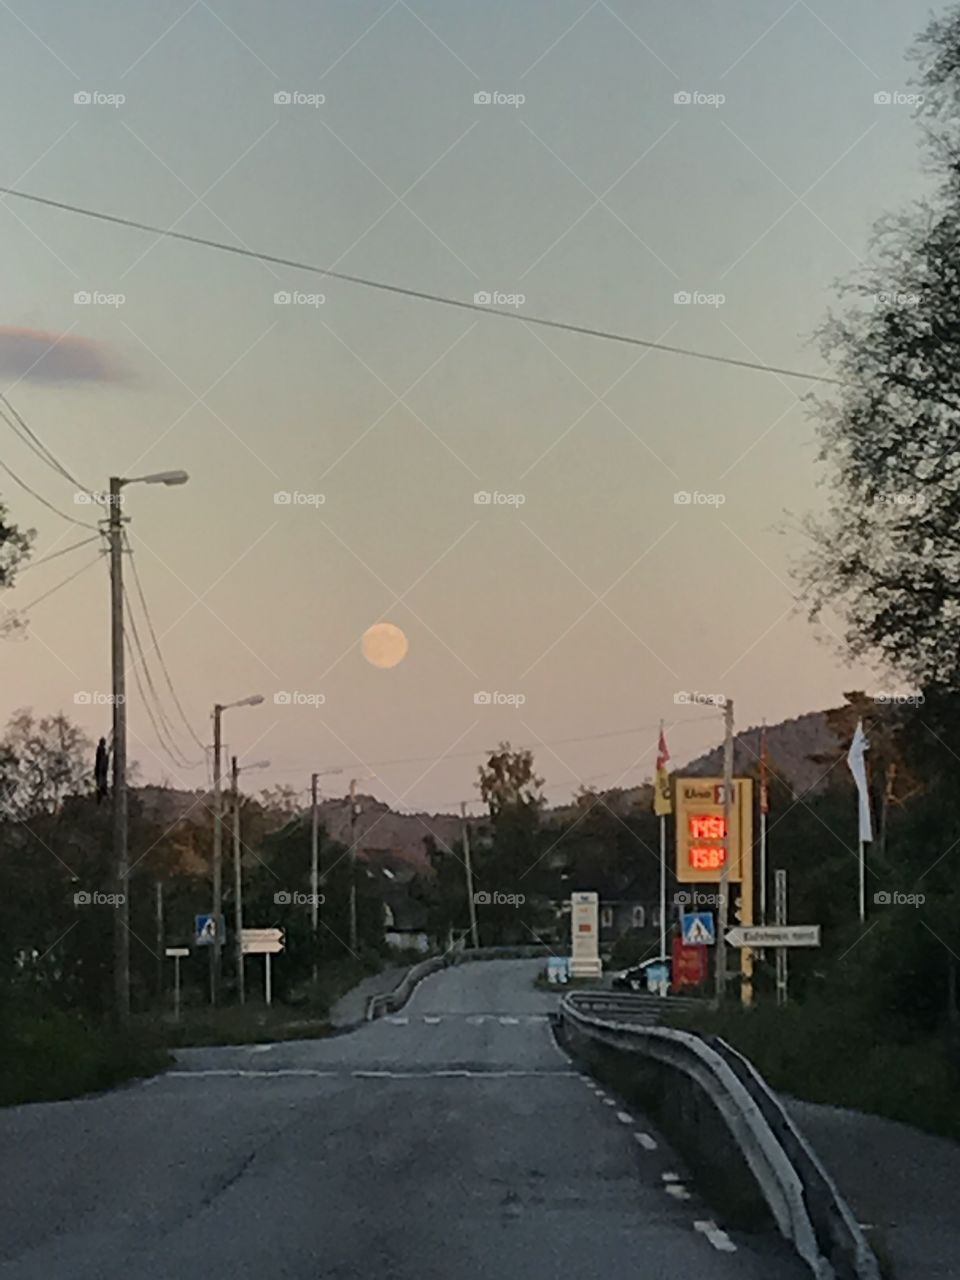 Full moon over a gas station in Norway. The dawn is setting, and the sunset is about to end, as we drive down a road towards the moon, with a gas station to the right. 